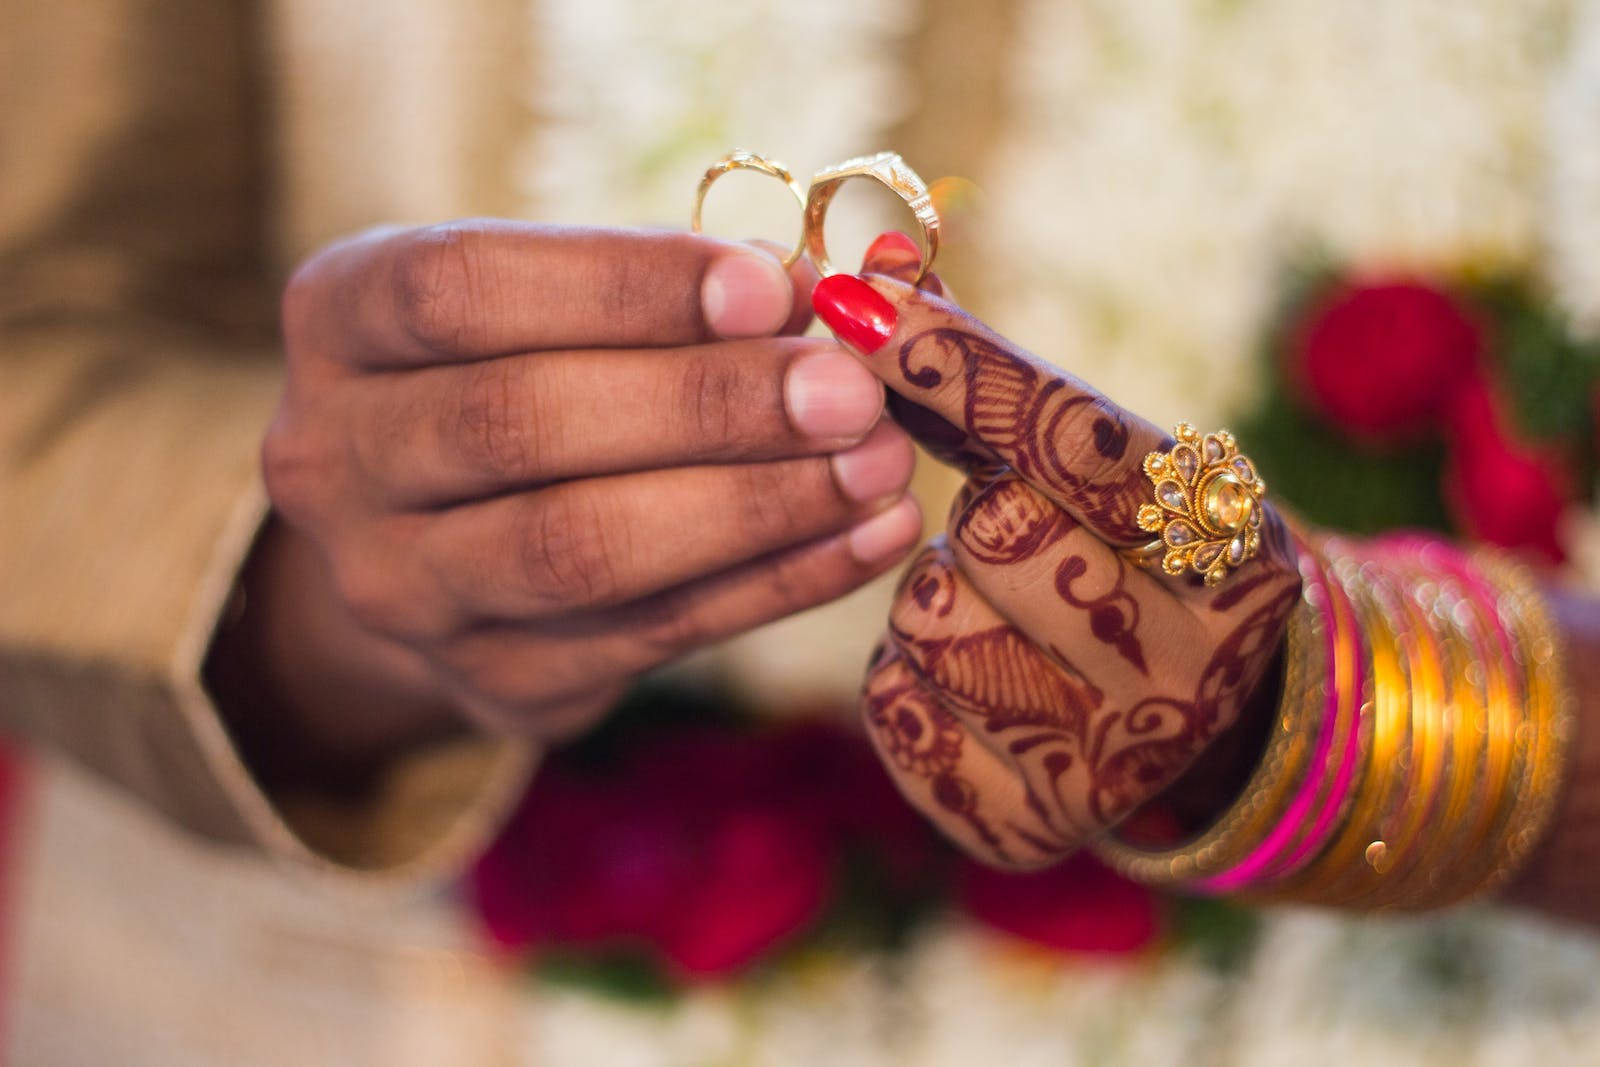 Indian Couple Enthralling Moment Of Exchanging Wedding Rings